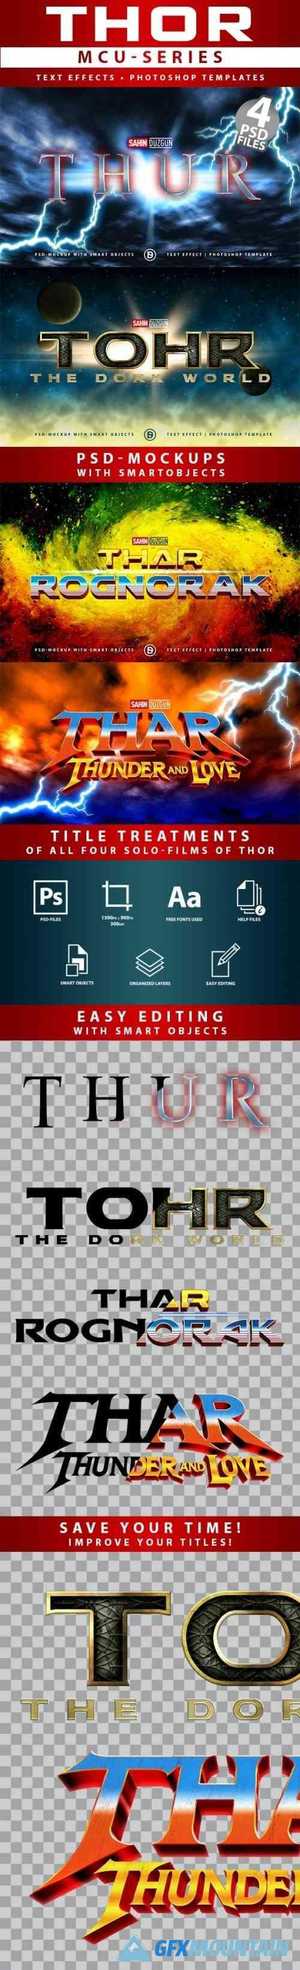 THOR - MCU-Film Series | Text-Effects/Mockups | Template-Package 26728529